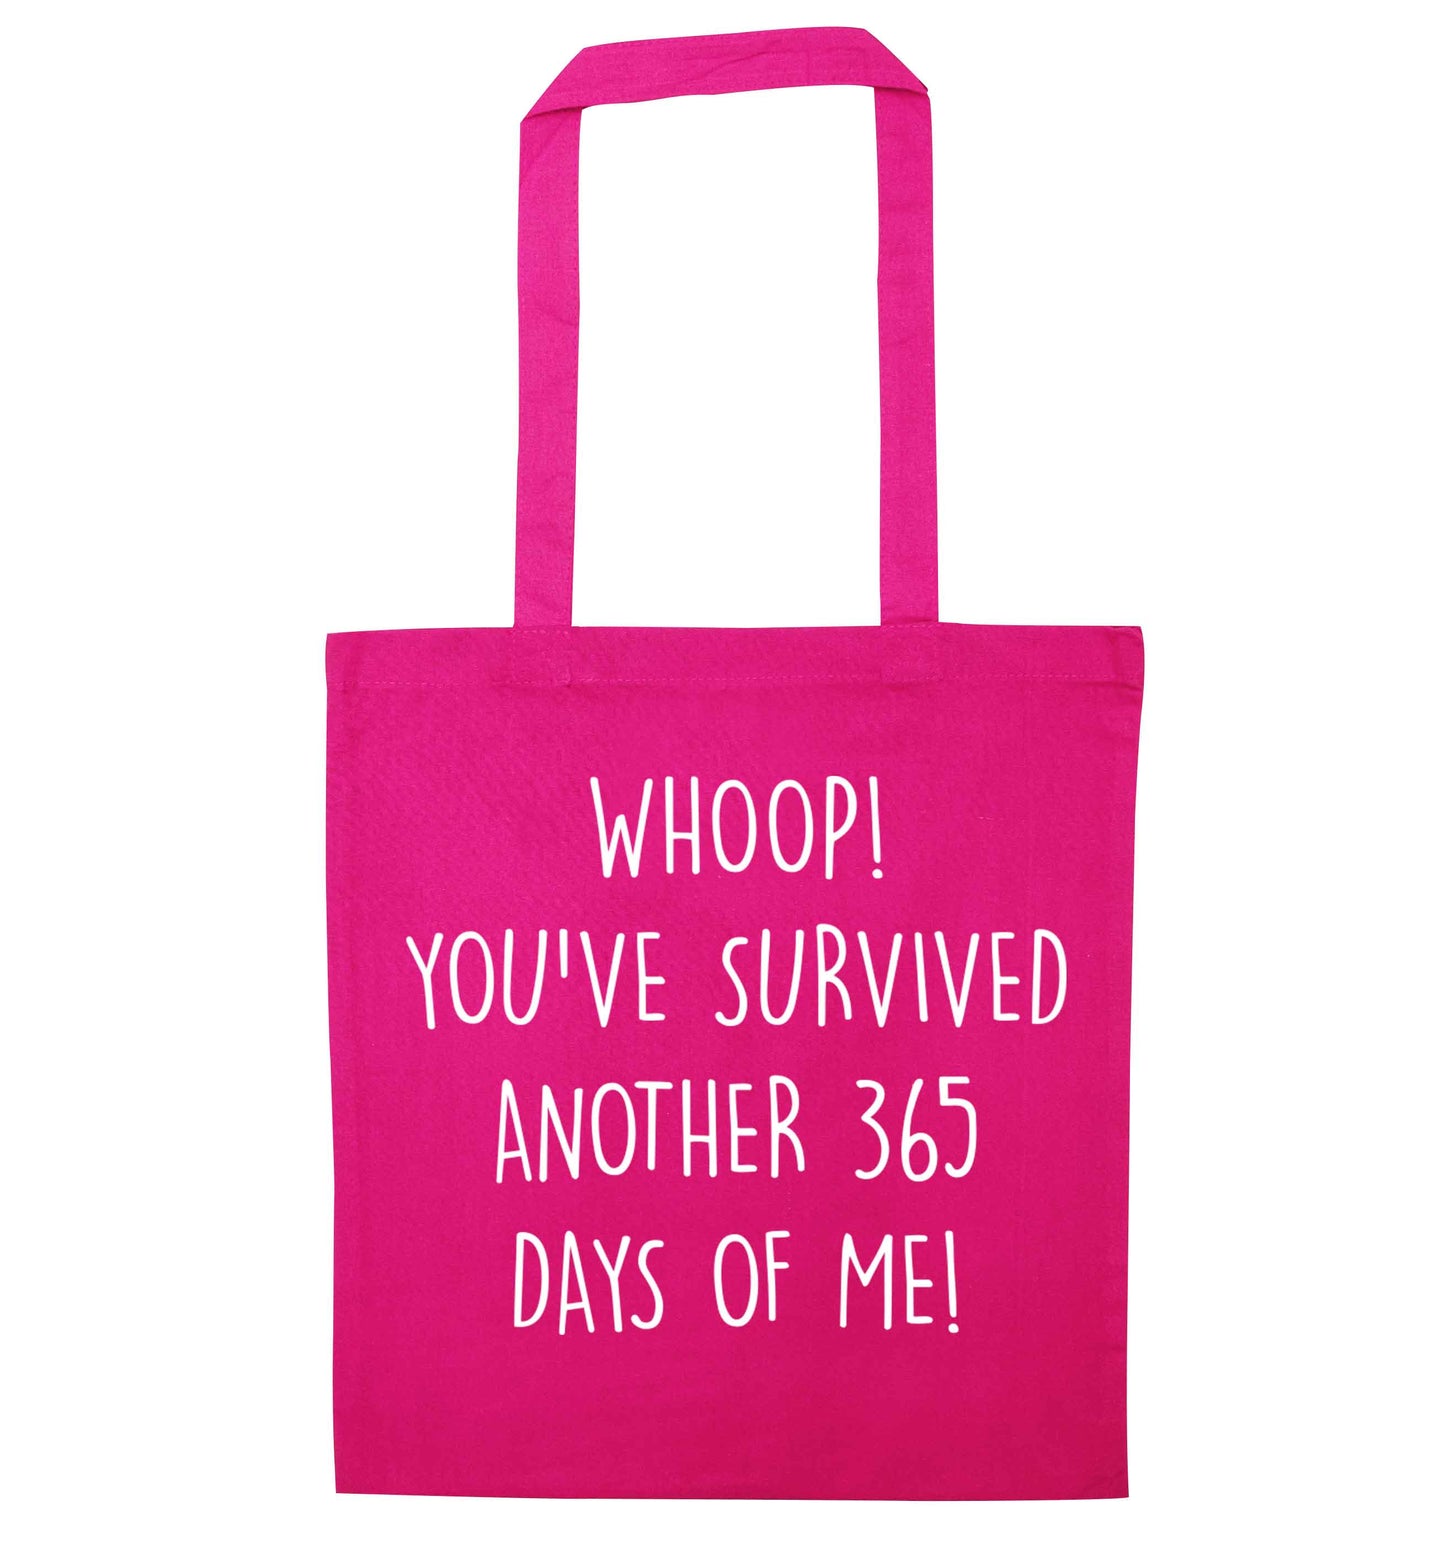 Whoop! You've survived another 365 days with me! pink tote bag